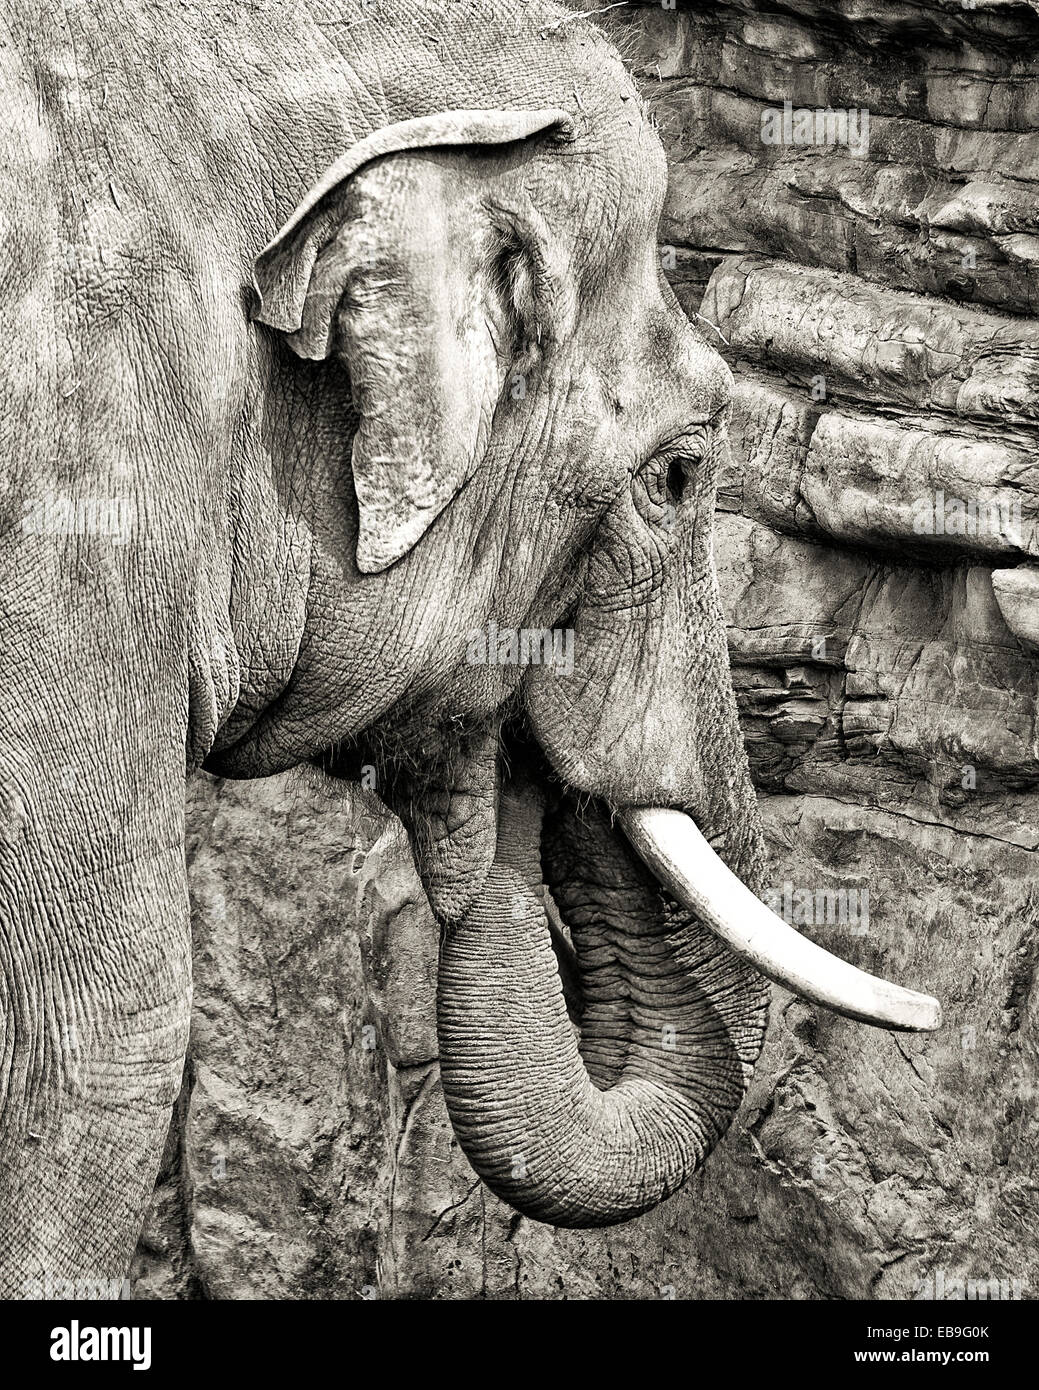 Female Asian elephant ,with trunk in mouth,feeding on salt from a cliff.  Head with tusks, HDR, black and white Stock Photo